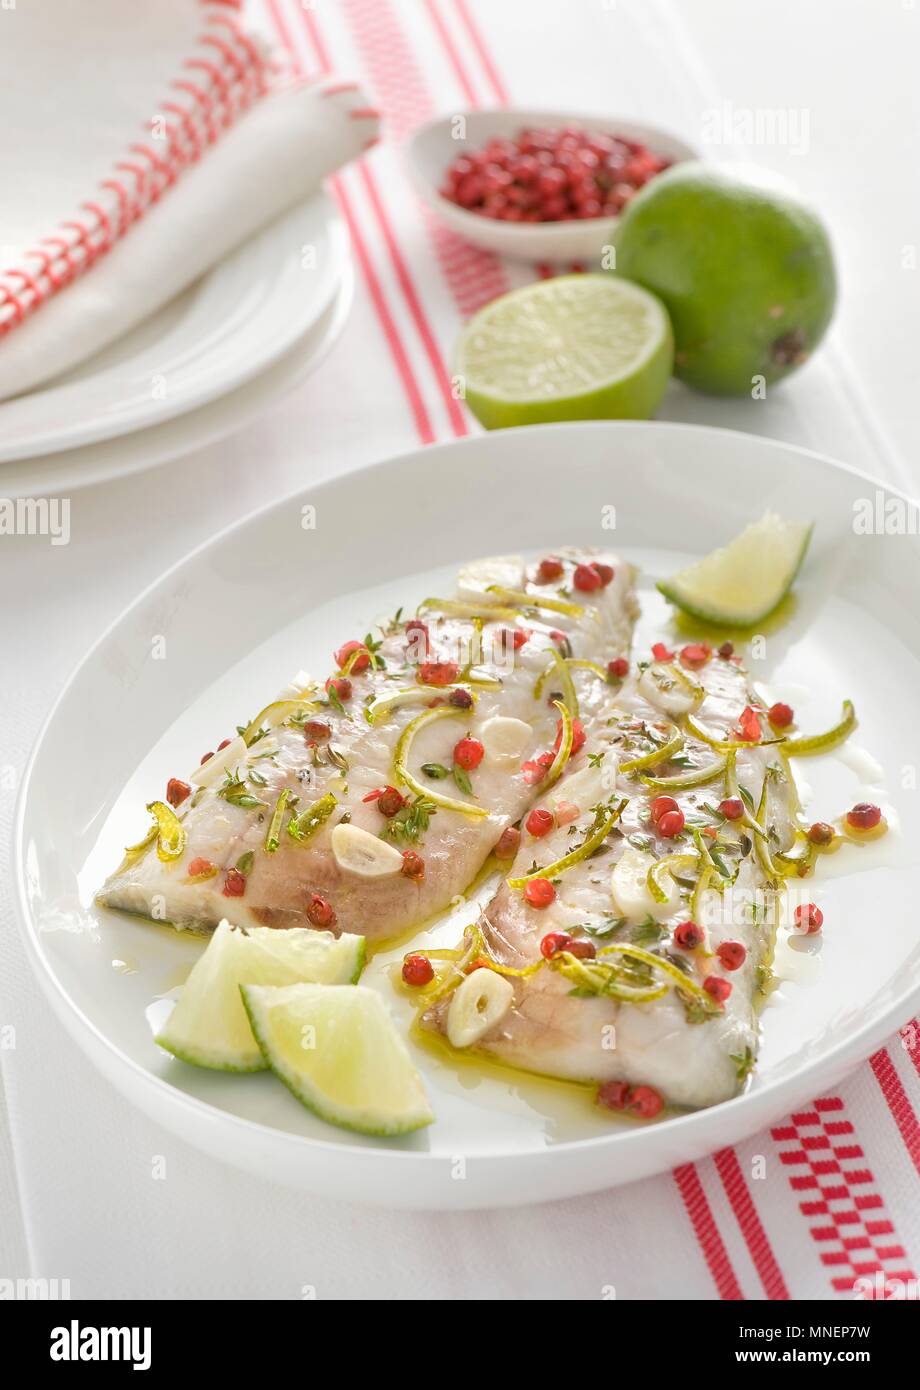 Mackerel fillets with pink pepper, limes and garlic Stock Photo